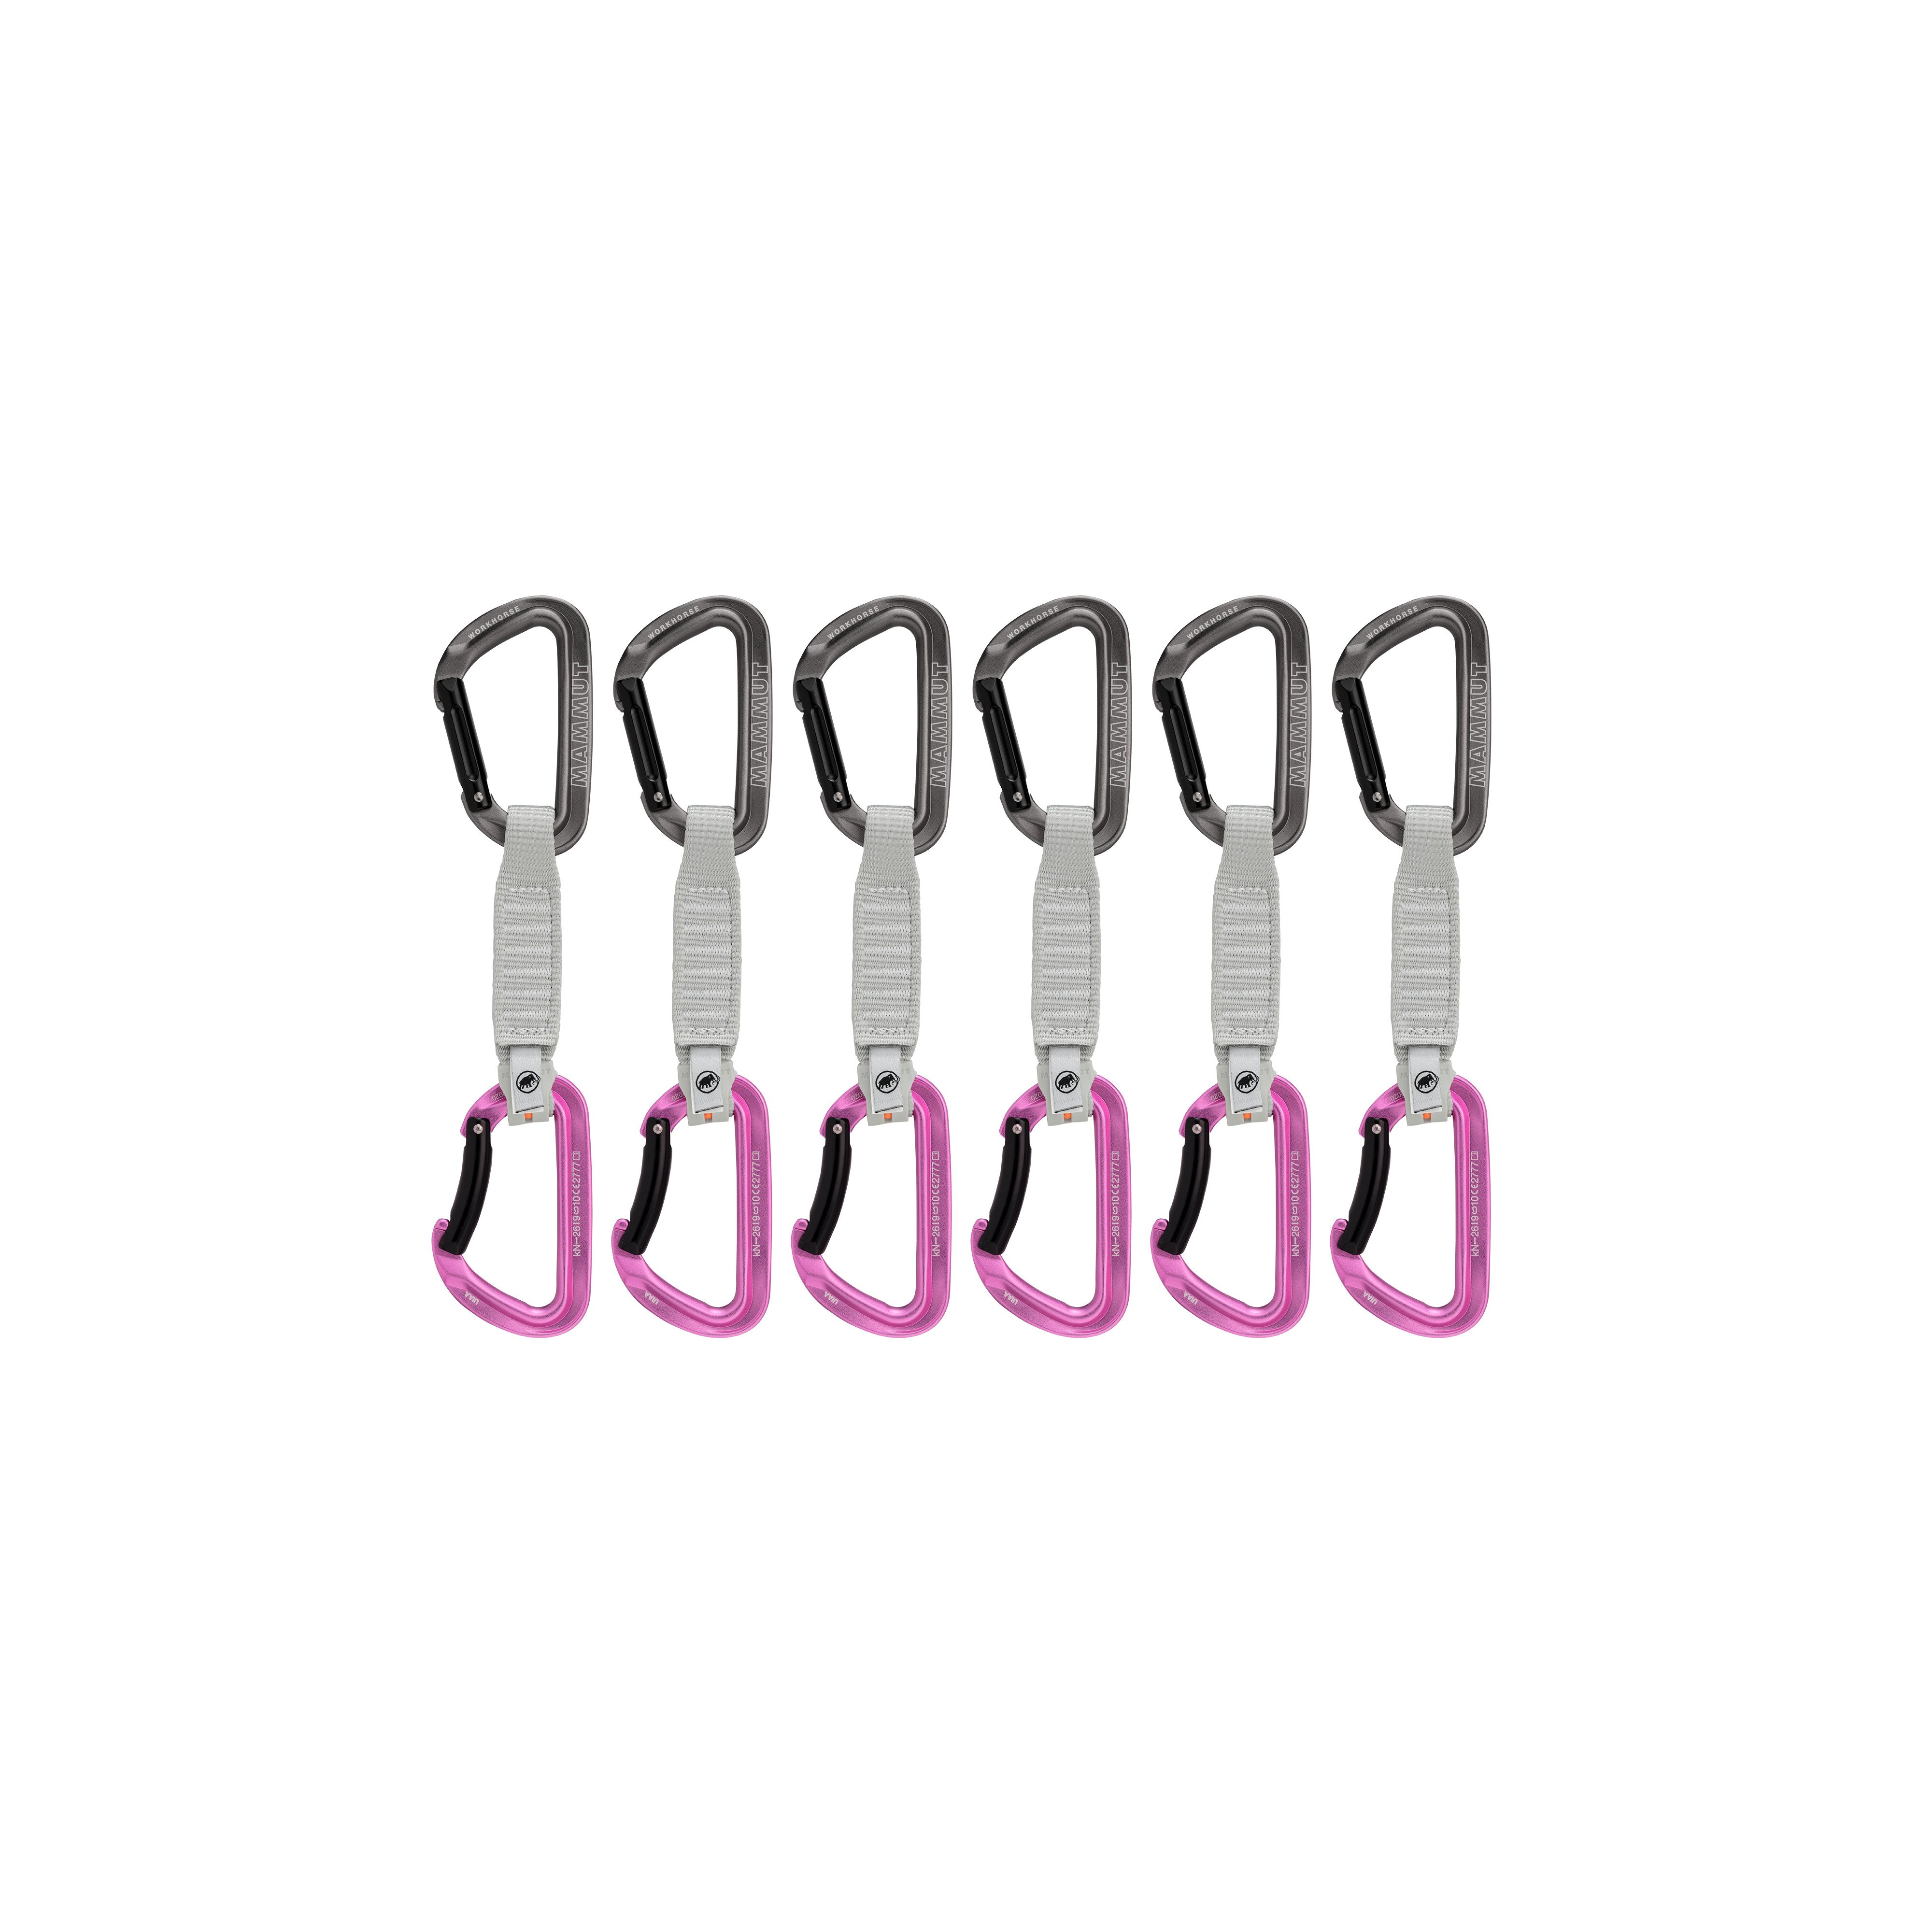 Workhorse Keylock 12 cm 6-Pack Quickdraws - 12 cm product image